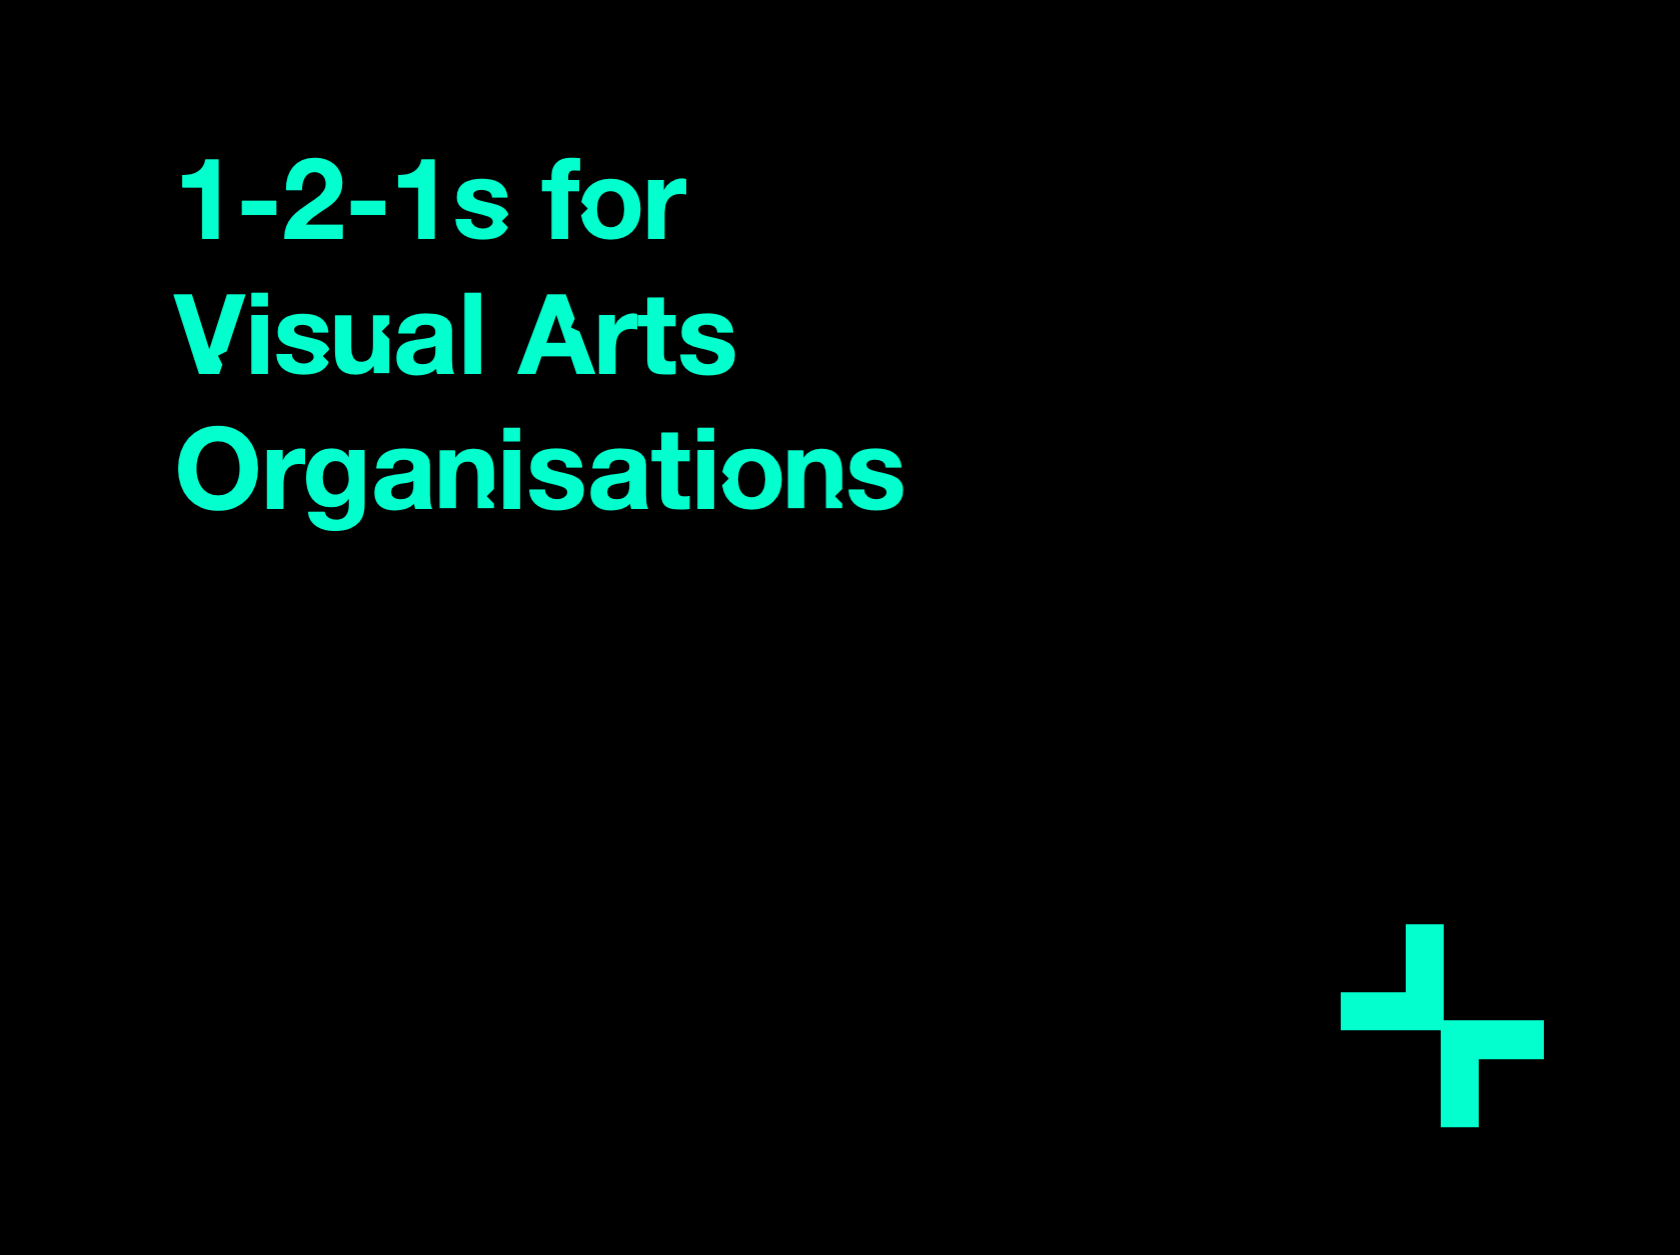 1-2-1s for Visual Arts Organisations